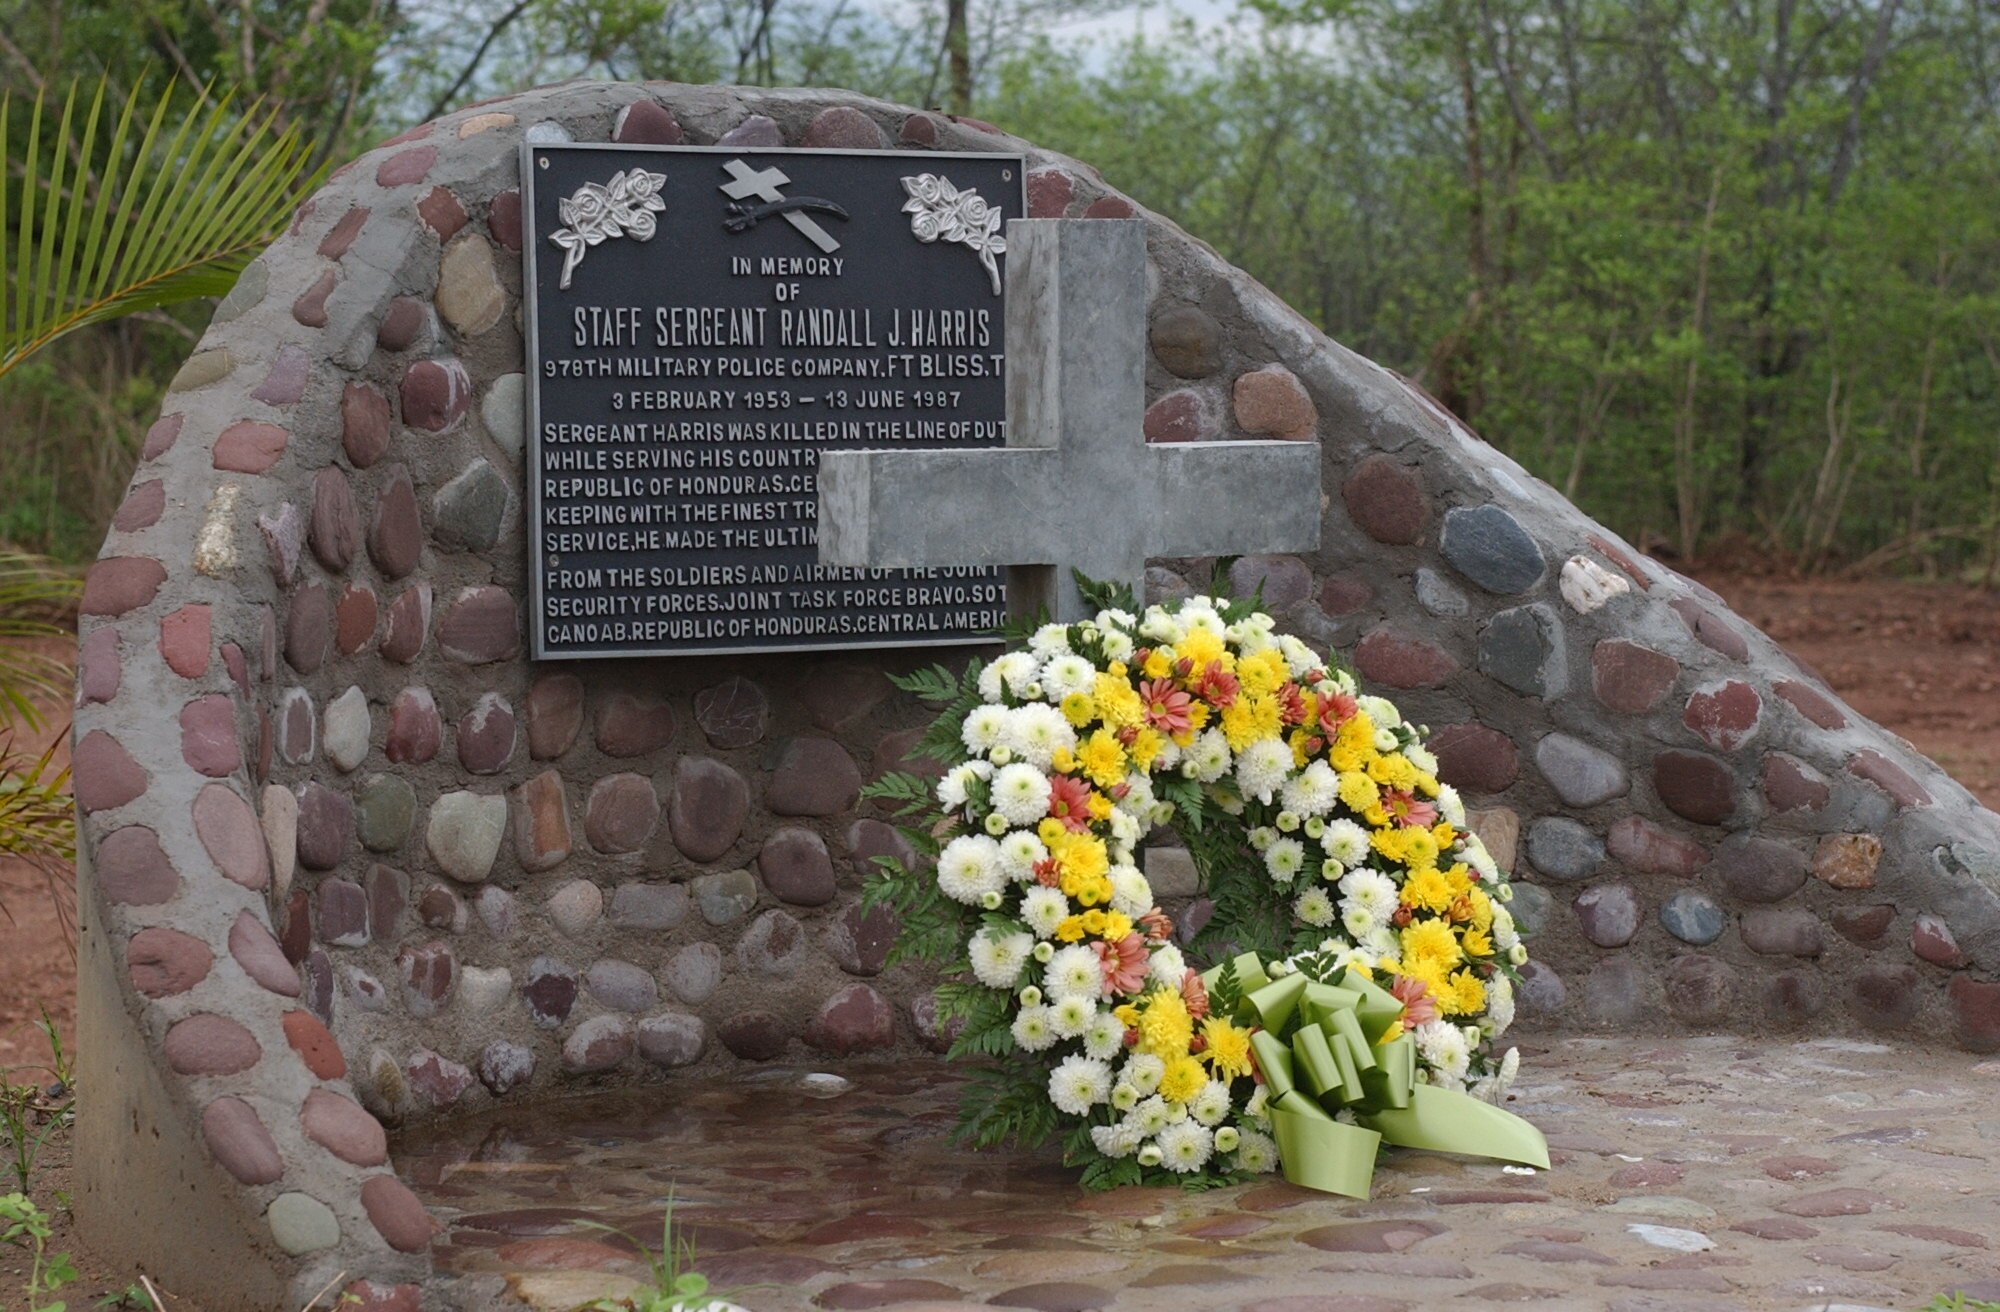 SOTO CANO AIR BASE, Honduras – A wreath rests at the memorial monument in honor of Army Staff Sgt. Randall J. Harris, who died from wounds suffered in the line of duty here on June 13, 1987.  Sergeant Harris was deployed here from the 978th Military Police Company at Fort Bliss, Texas.  Each year, Joint Task Force-Bravo holds a memorial service in remembrance of Sergeant Harris.   (U.S. Air Force photo/Tech. Sgt. Sonny Cohrs)